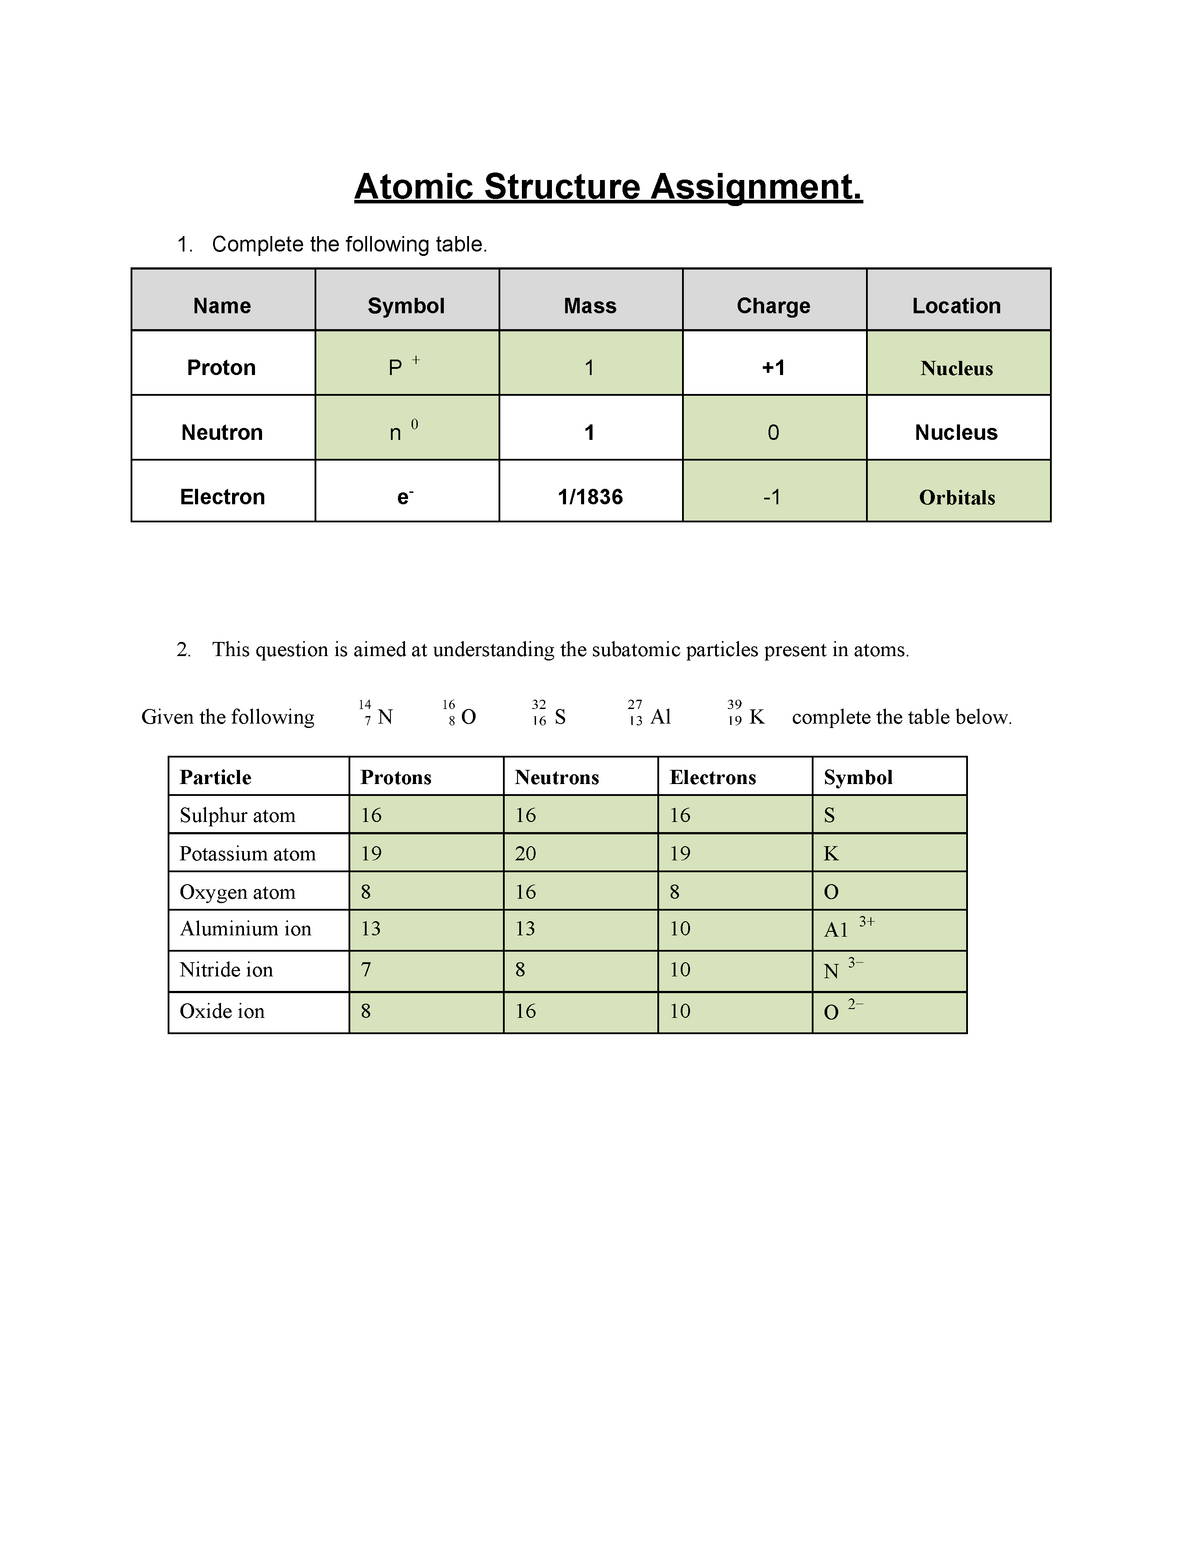 25-25 Atomic Structure worksheet - Atomic Structure Assignment Intended For Chemistry Atomic Structure Worksheet